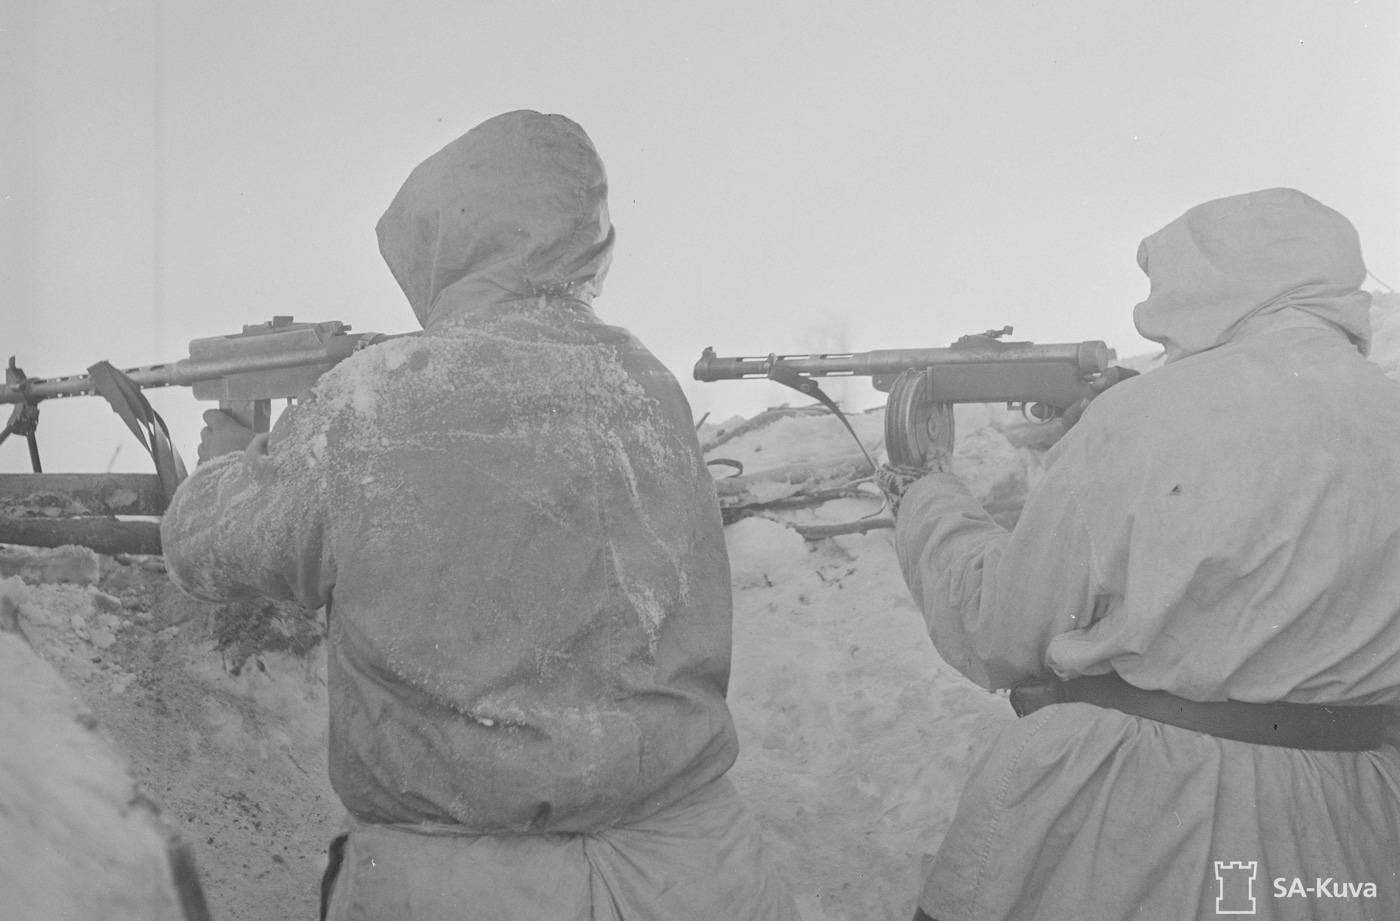 Shown in this photographic image are two Finnish soldiers. The one on the left is shooting a M/26 while the one on the right is firing a KP/-31 SMG. Both of these guns were Lahti designs and were used extensively against the Red Army. The weapons were produced for the Finnish services.